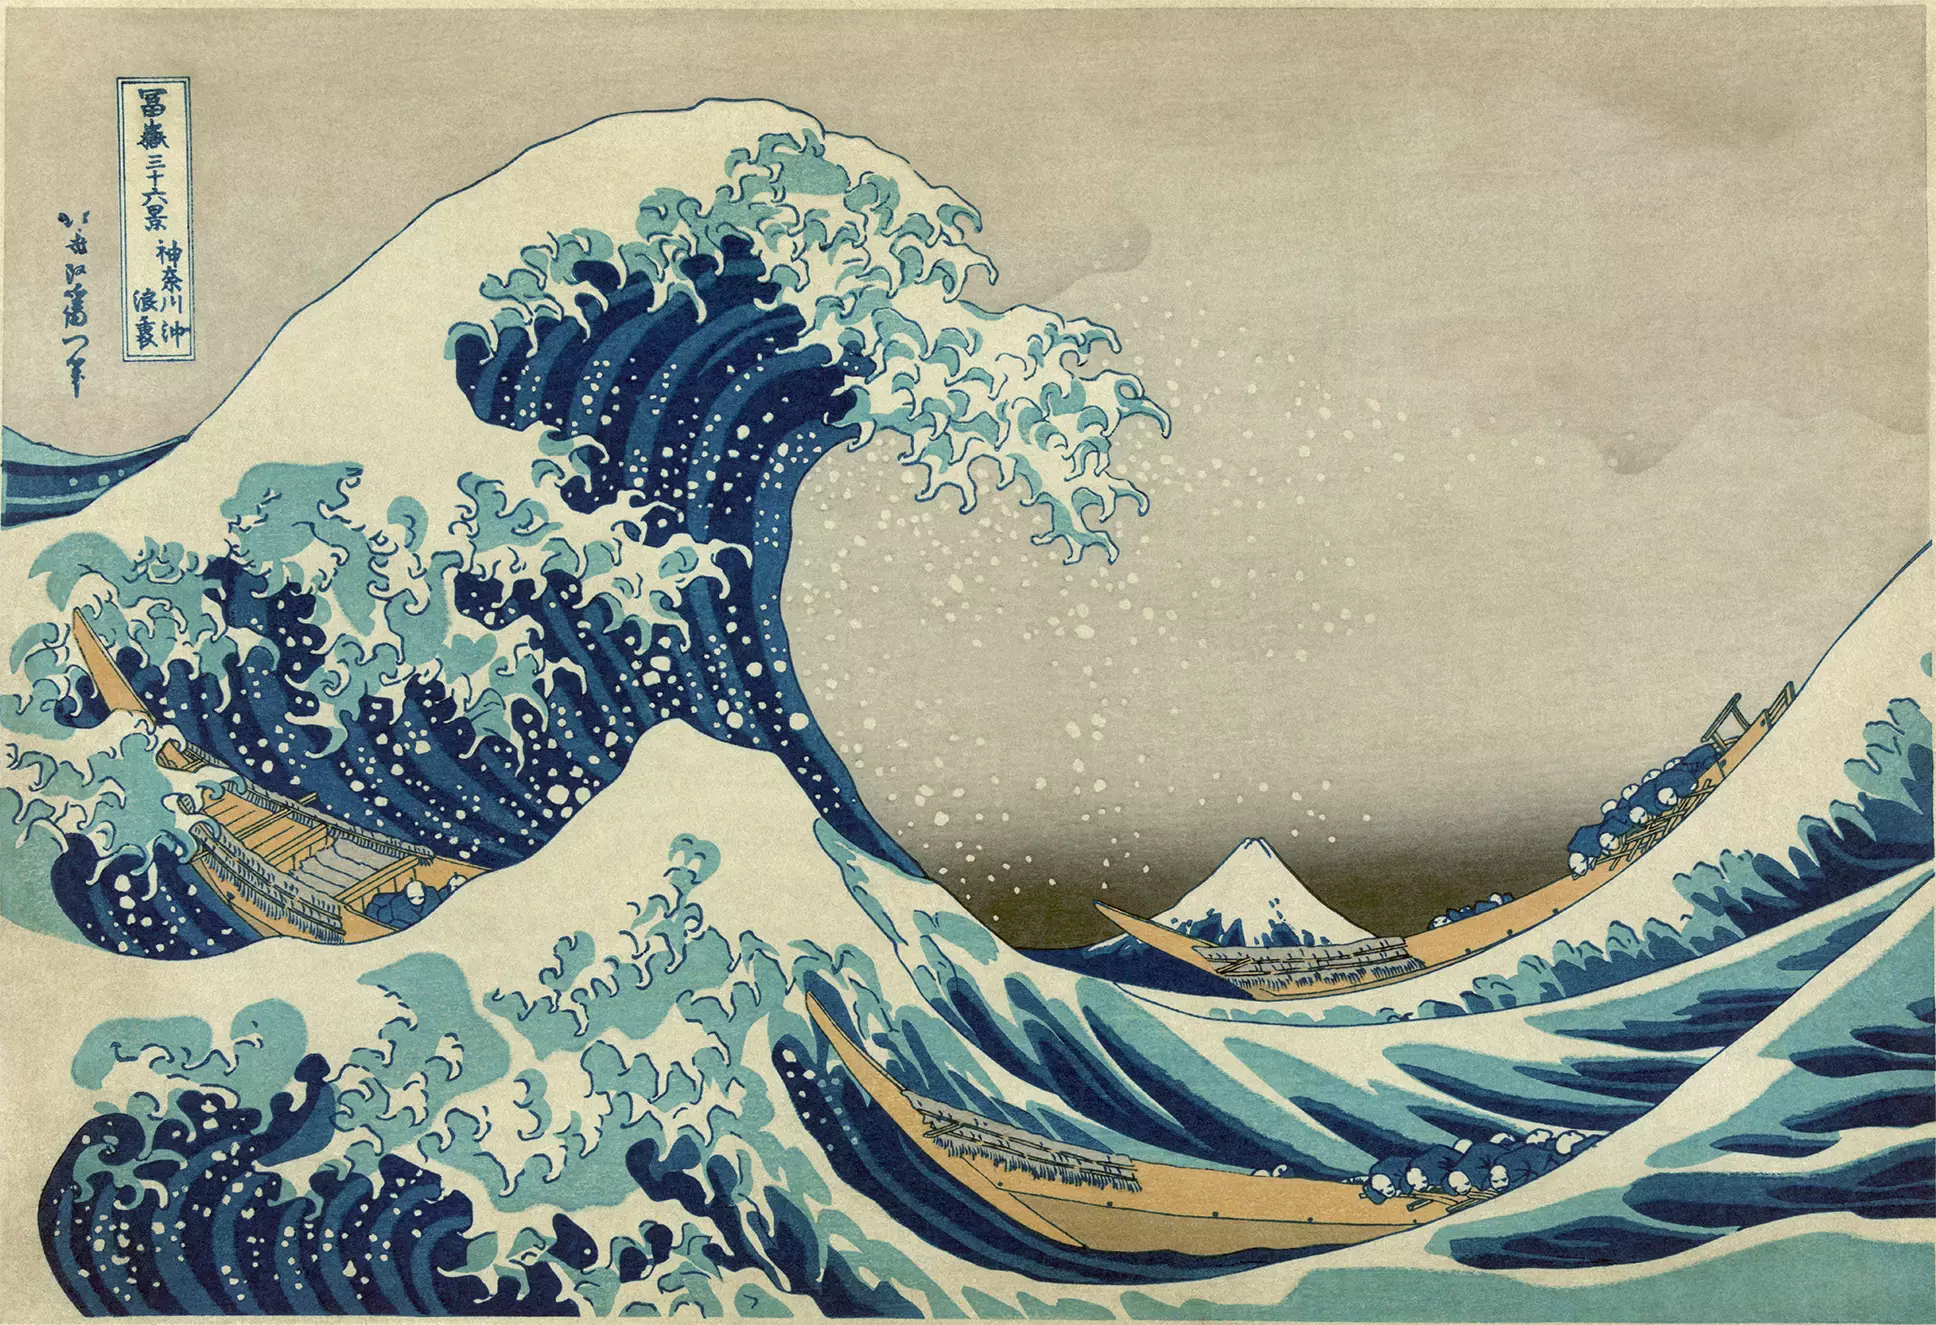 'The Great Wave' is Hokusai's most recognisable work